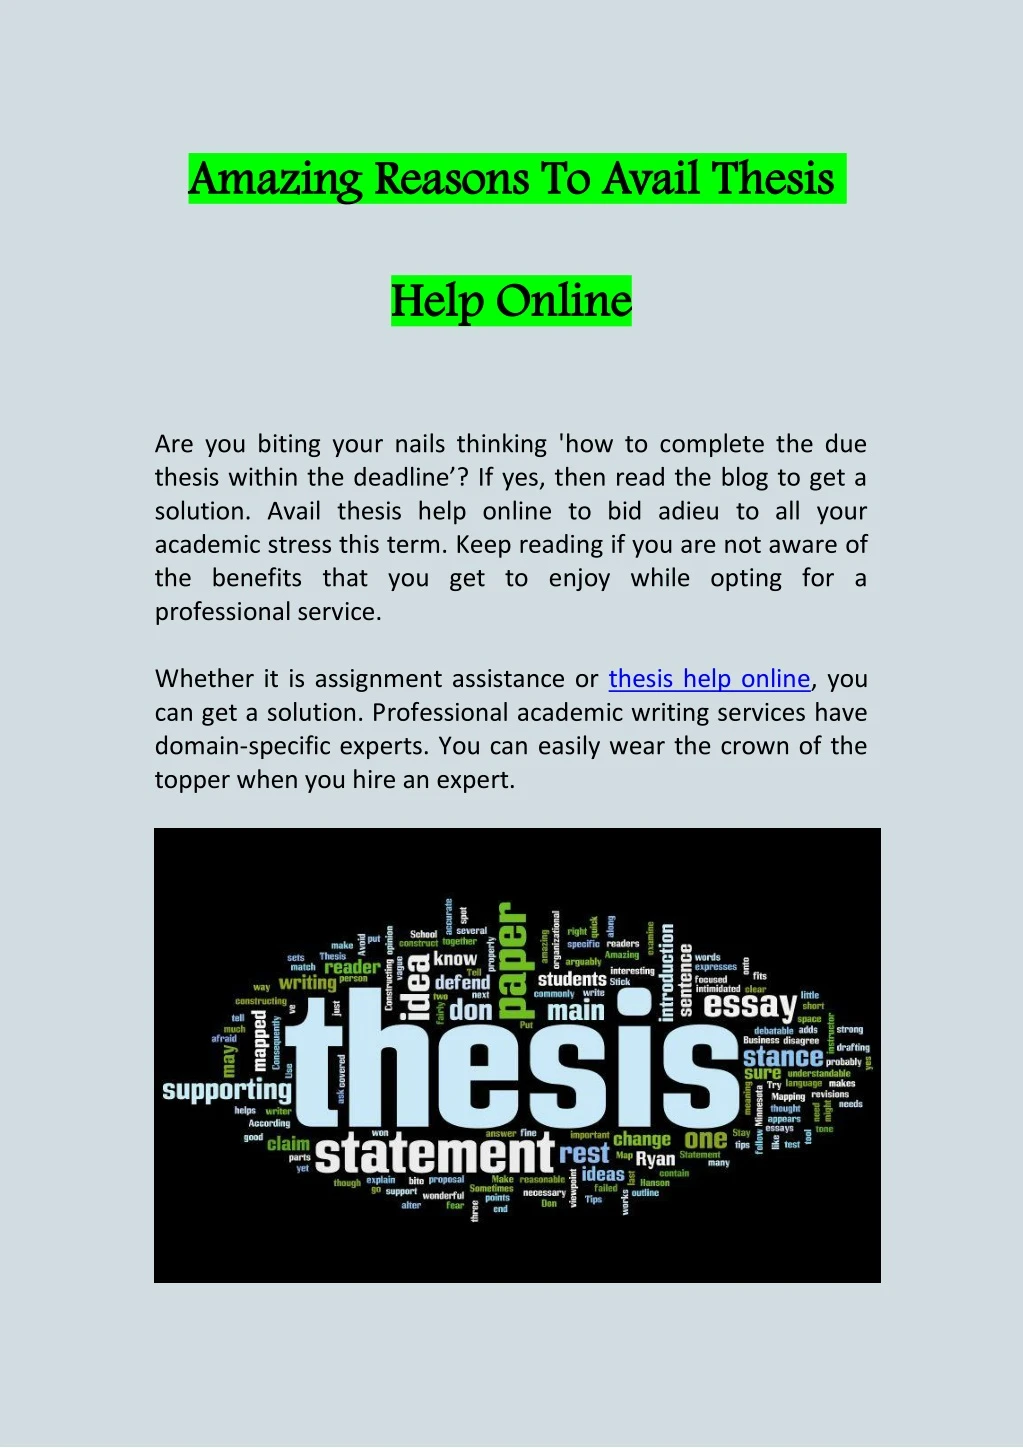 amazing amazing reasons to avail thesis reasons